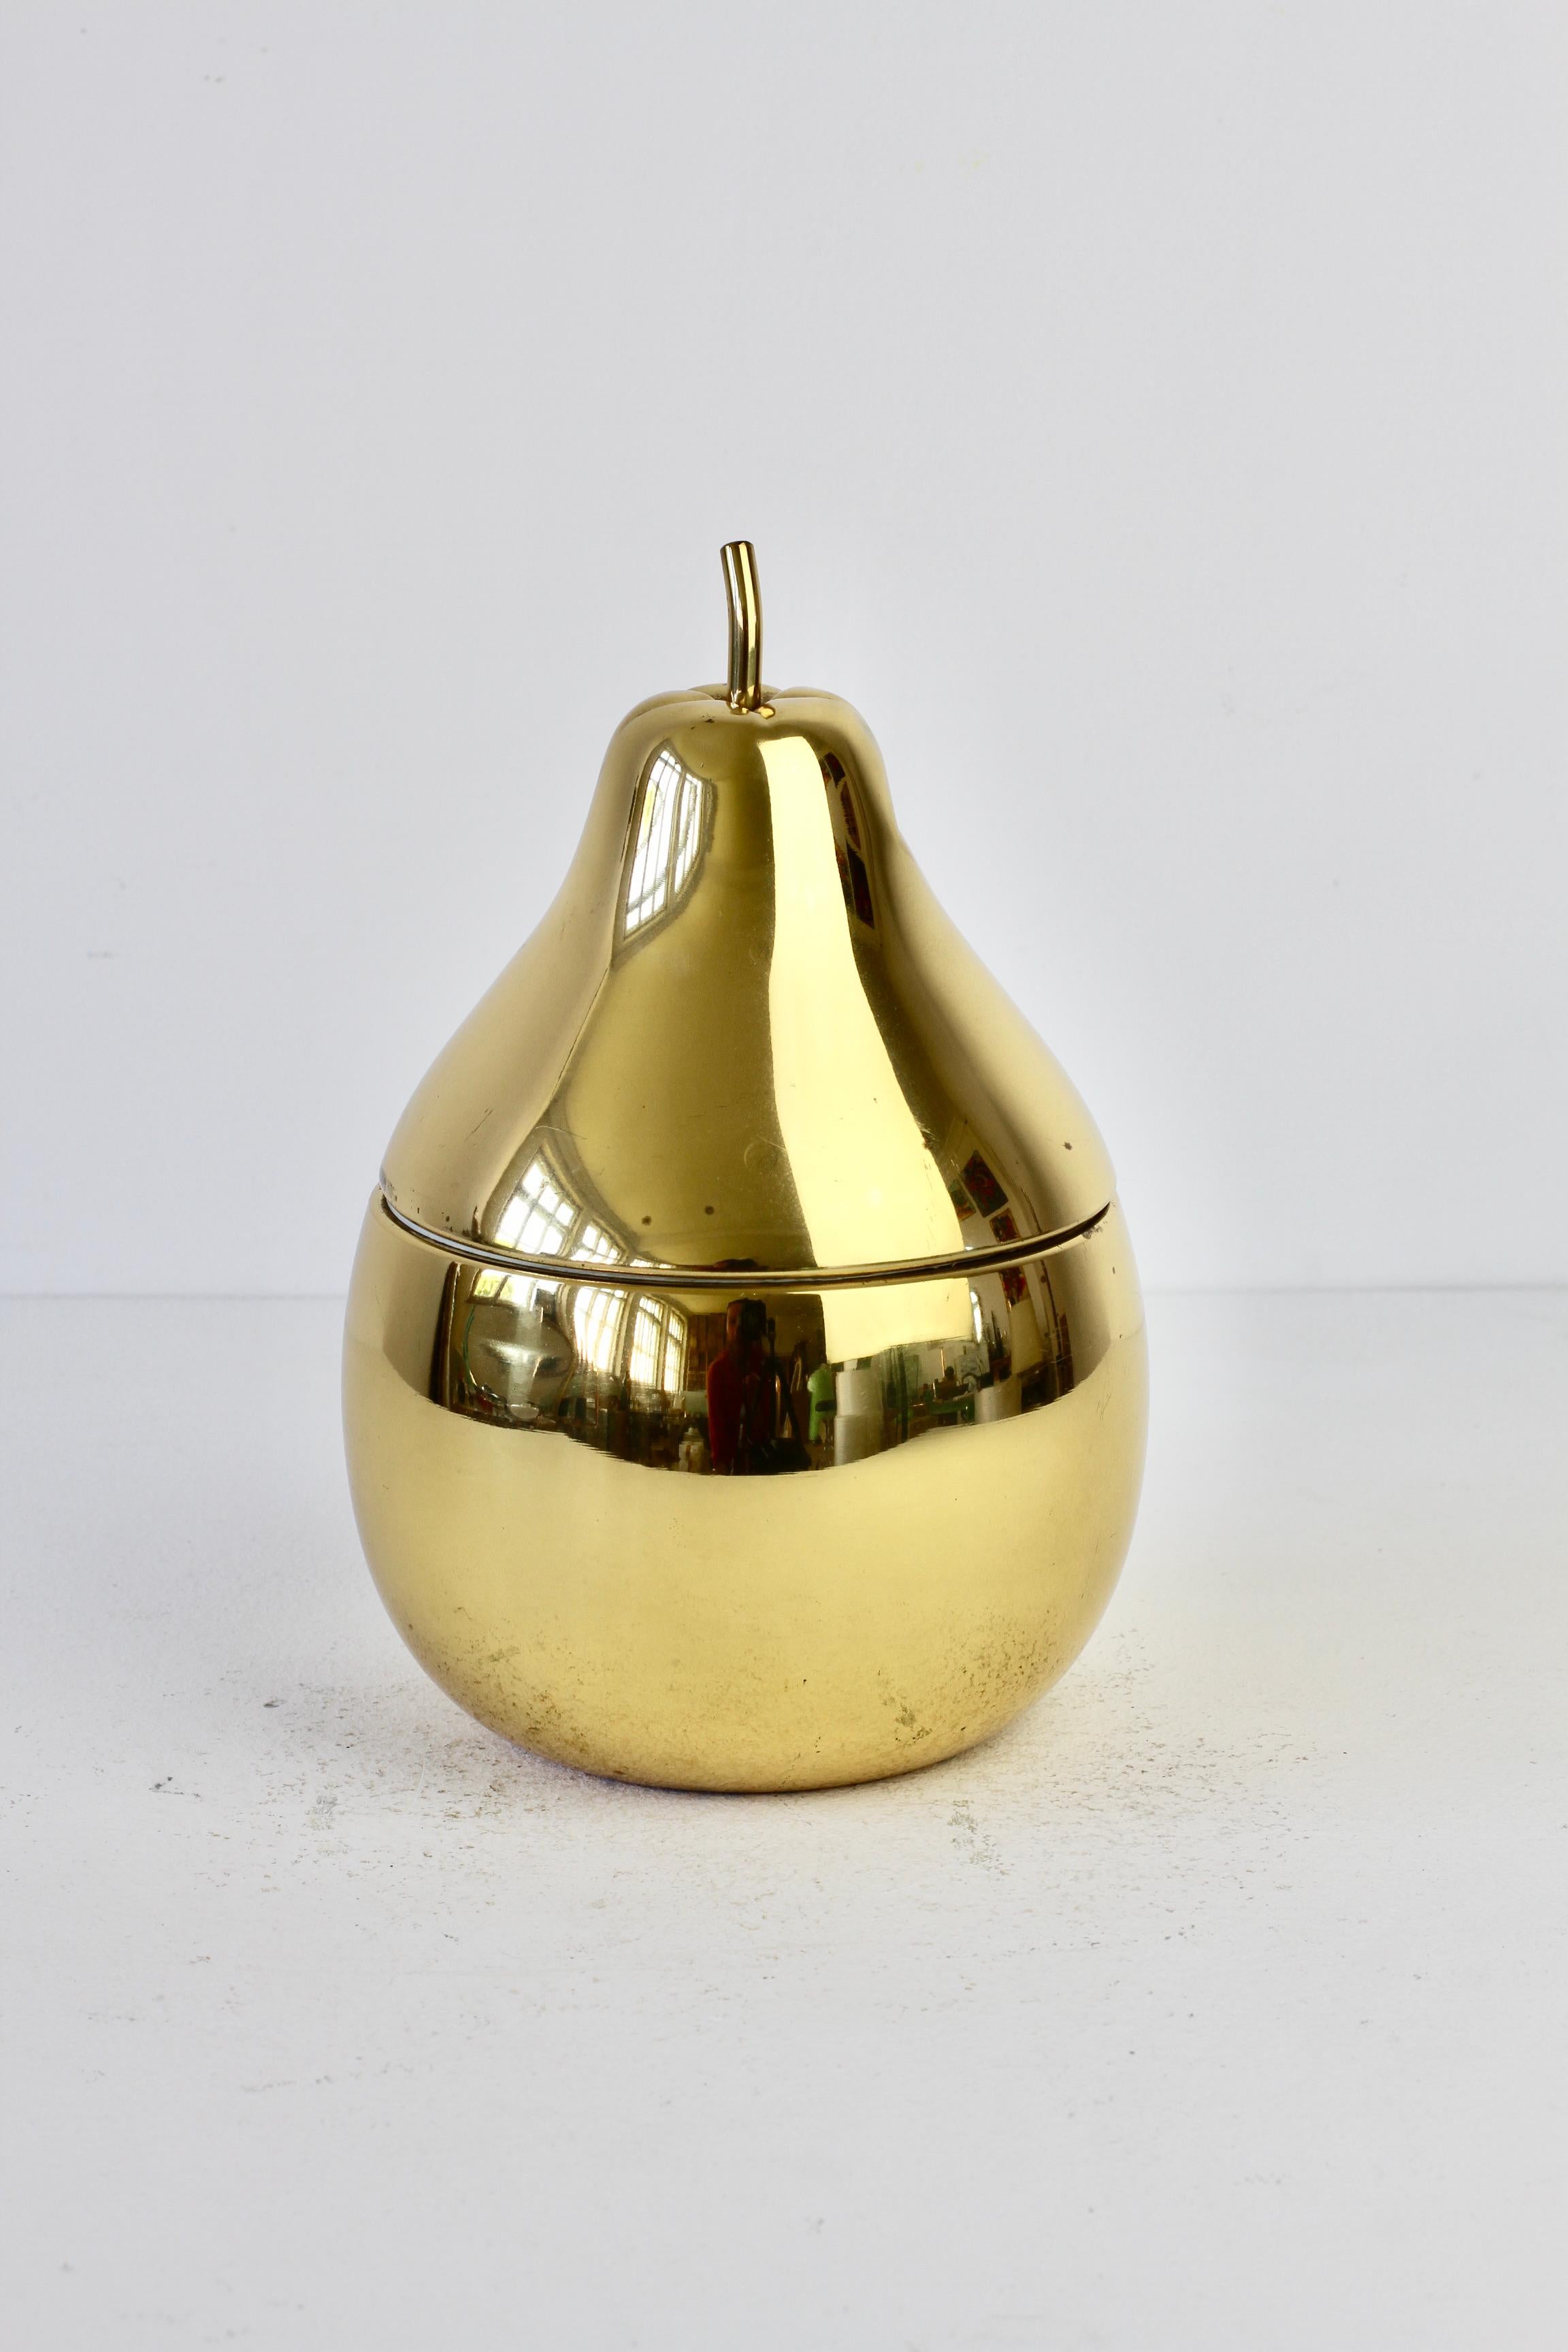 Polished Ettore Sottsass Style Vintage Pear Shaped Brass Ice Cube Bucket or Holder, 1970s For Sale